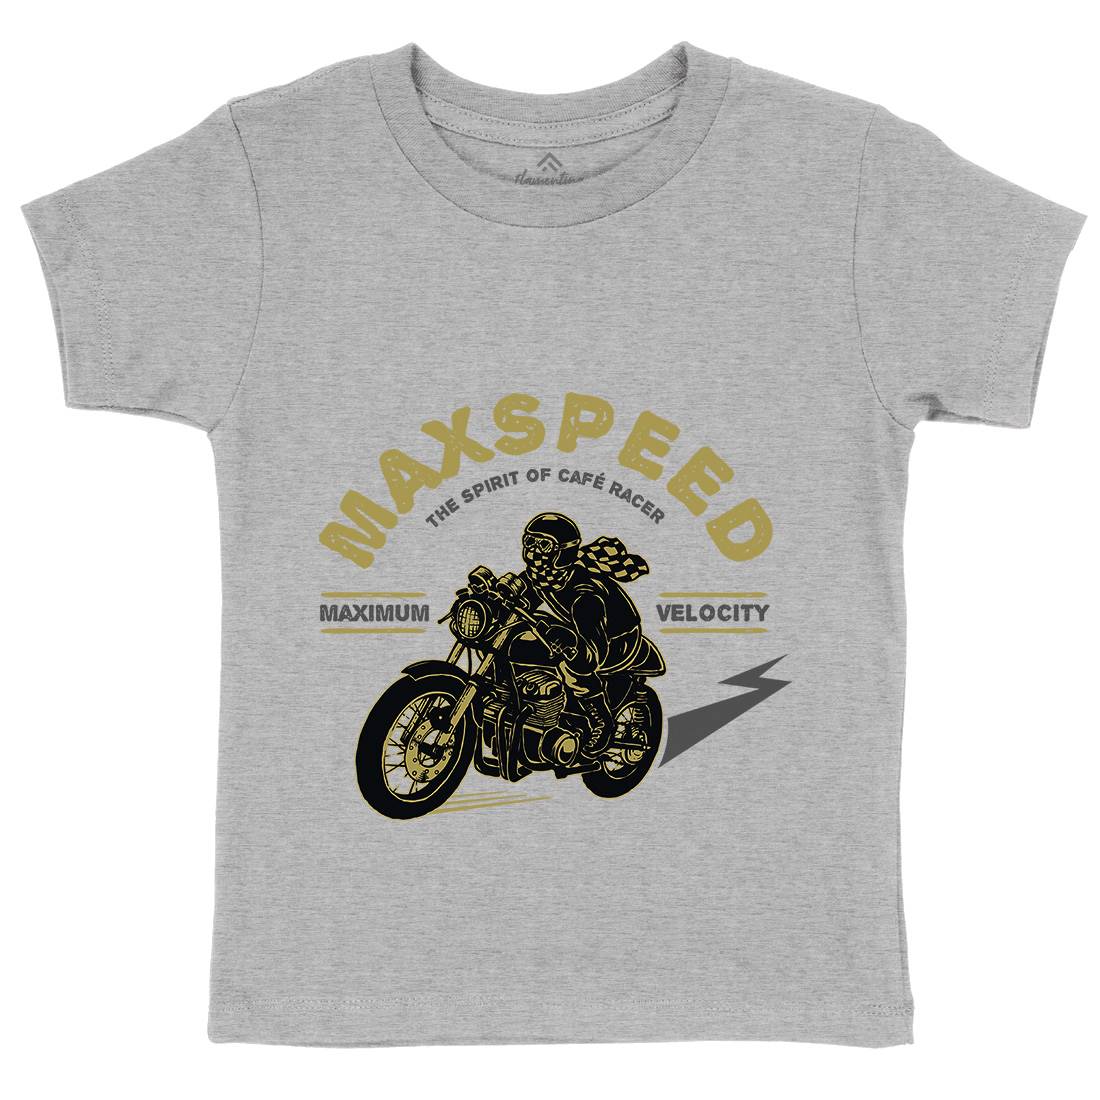 Max Speed Kids Crew Neck T-Shirt Motorcycles A343